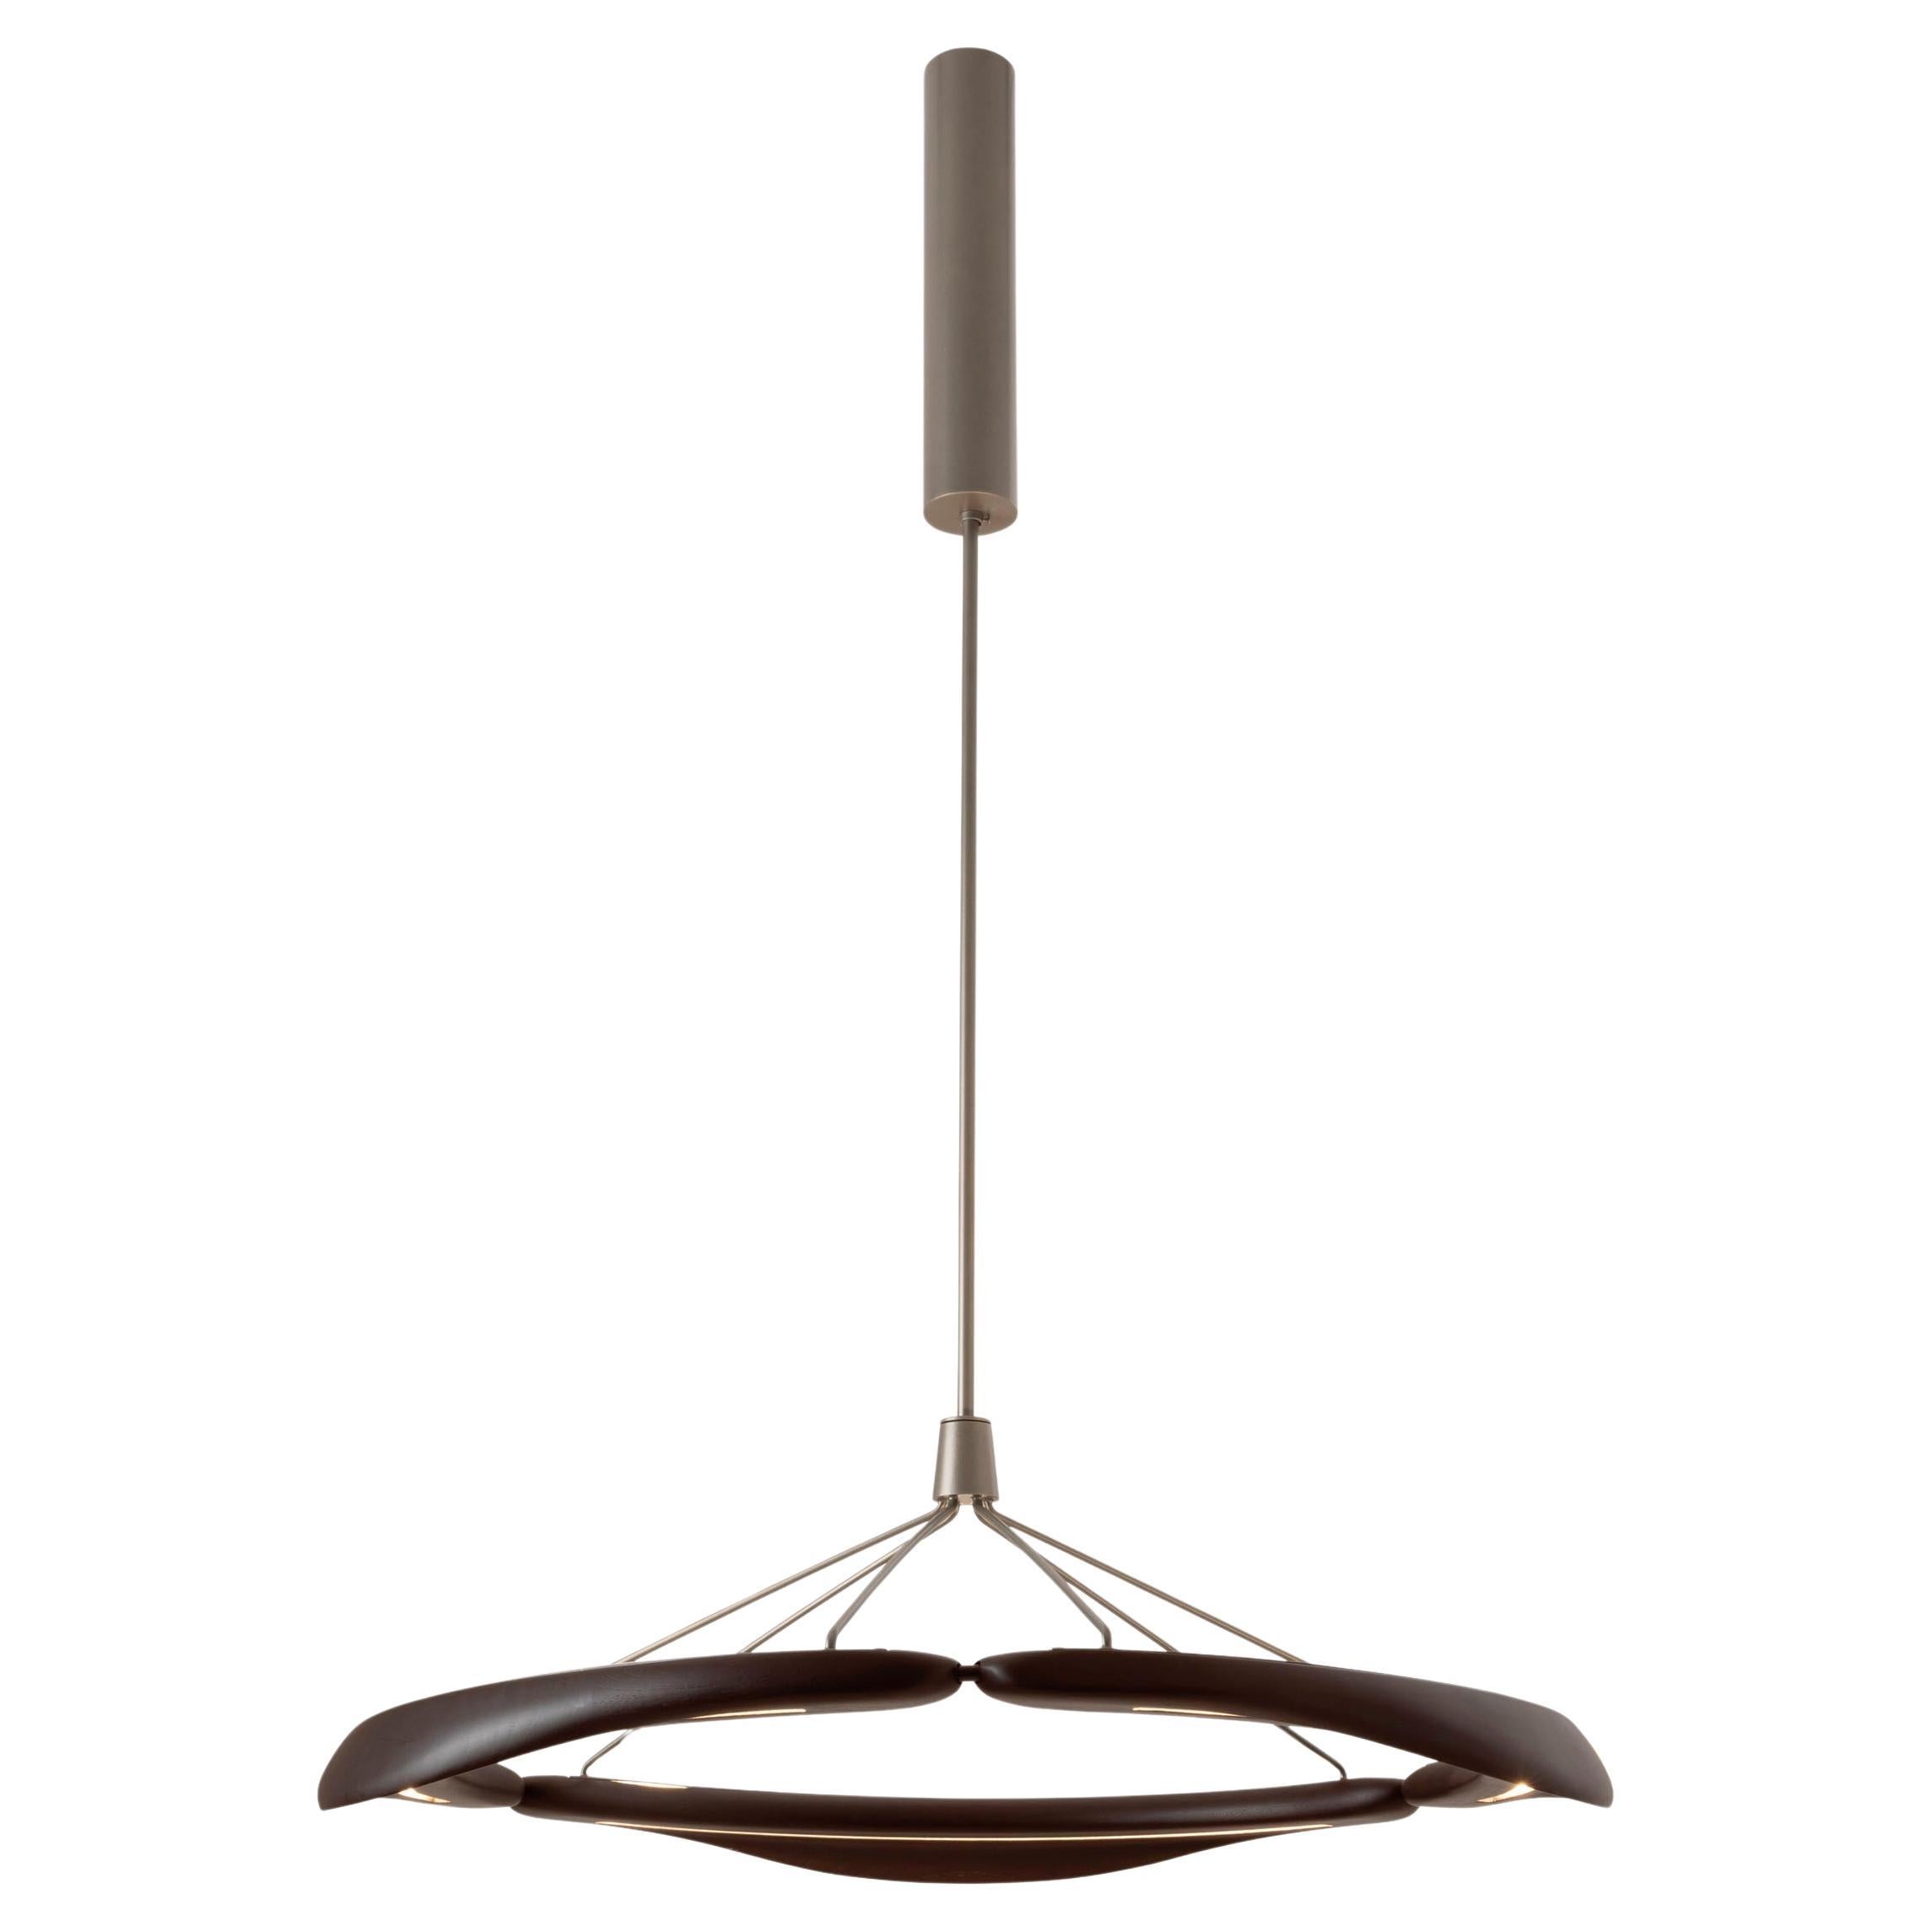 Dunes pendant lamp in canaletto walnut For Sale